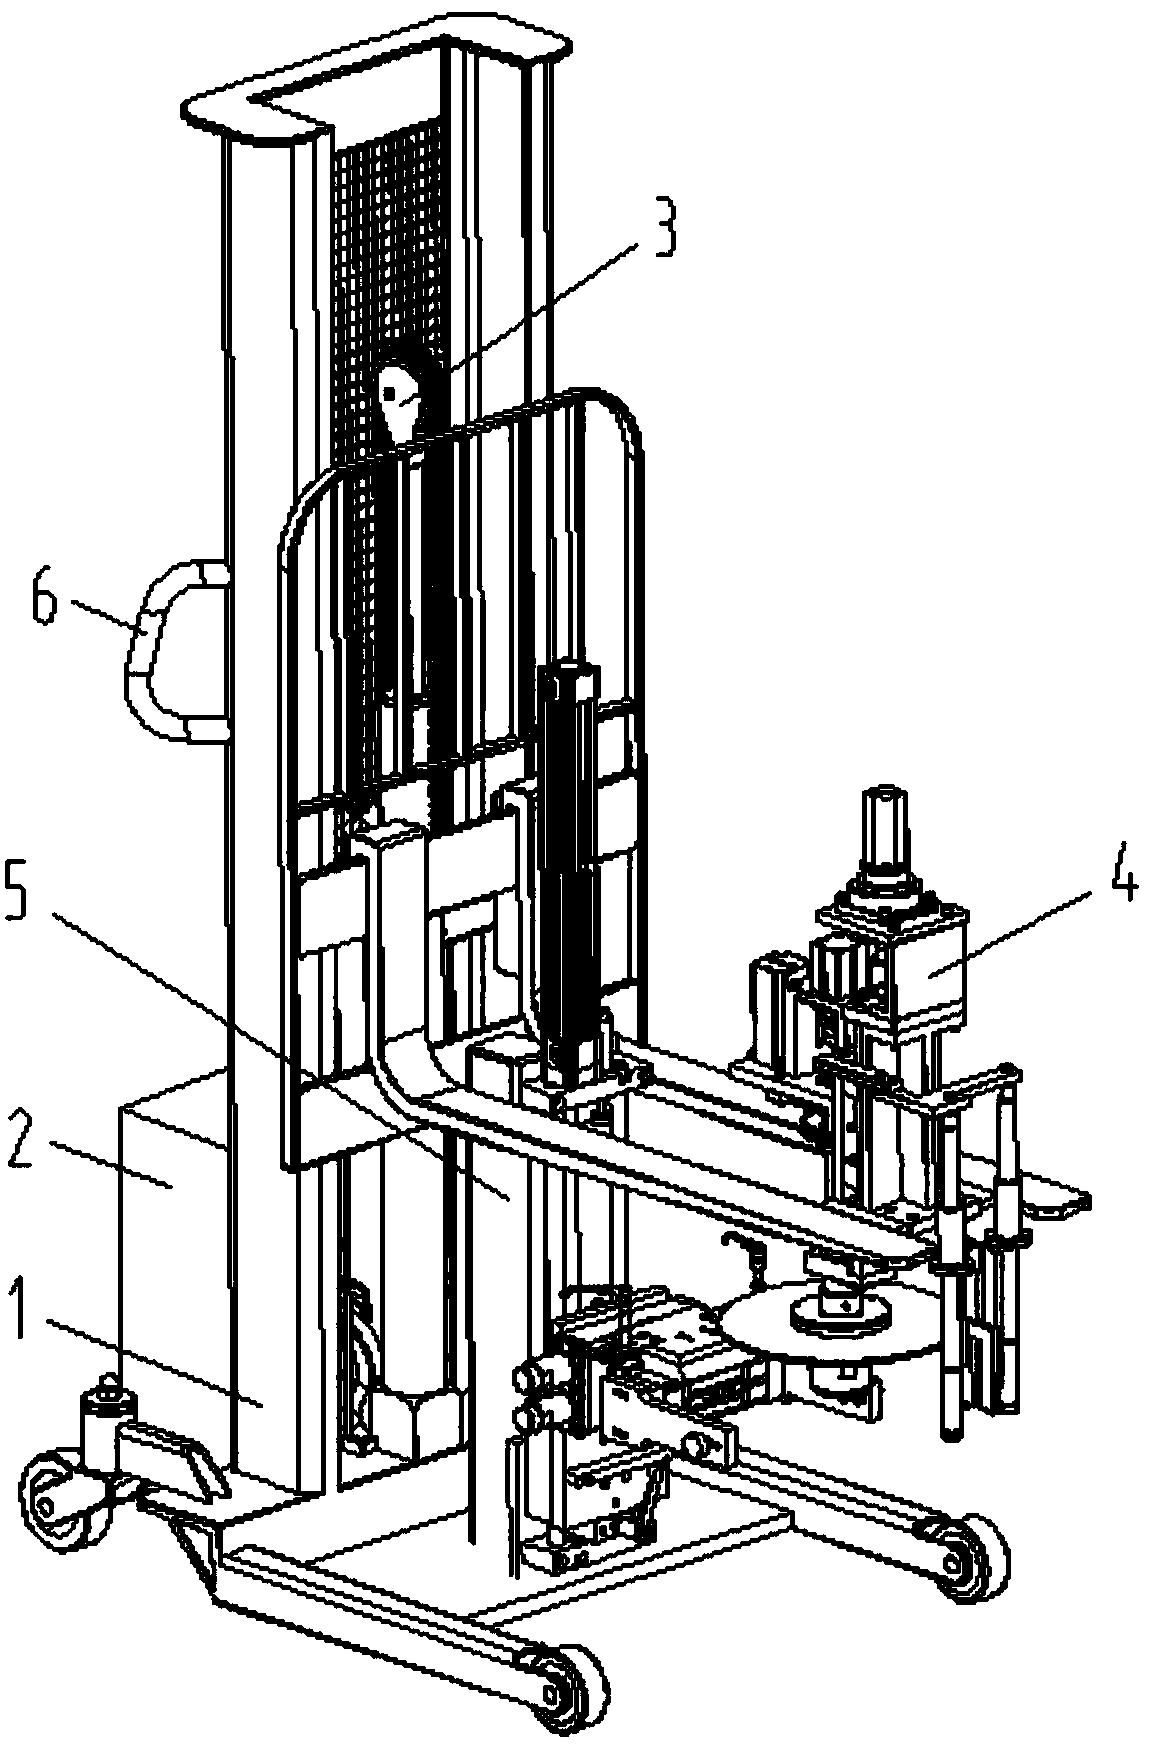 An automatic unloading tape reel machine